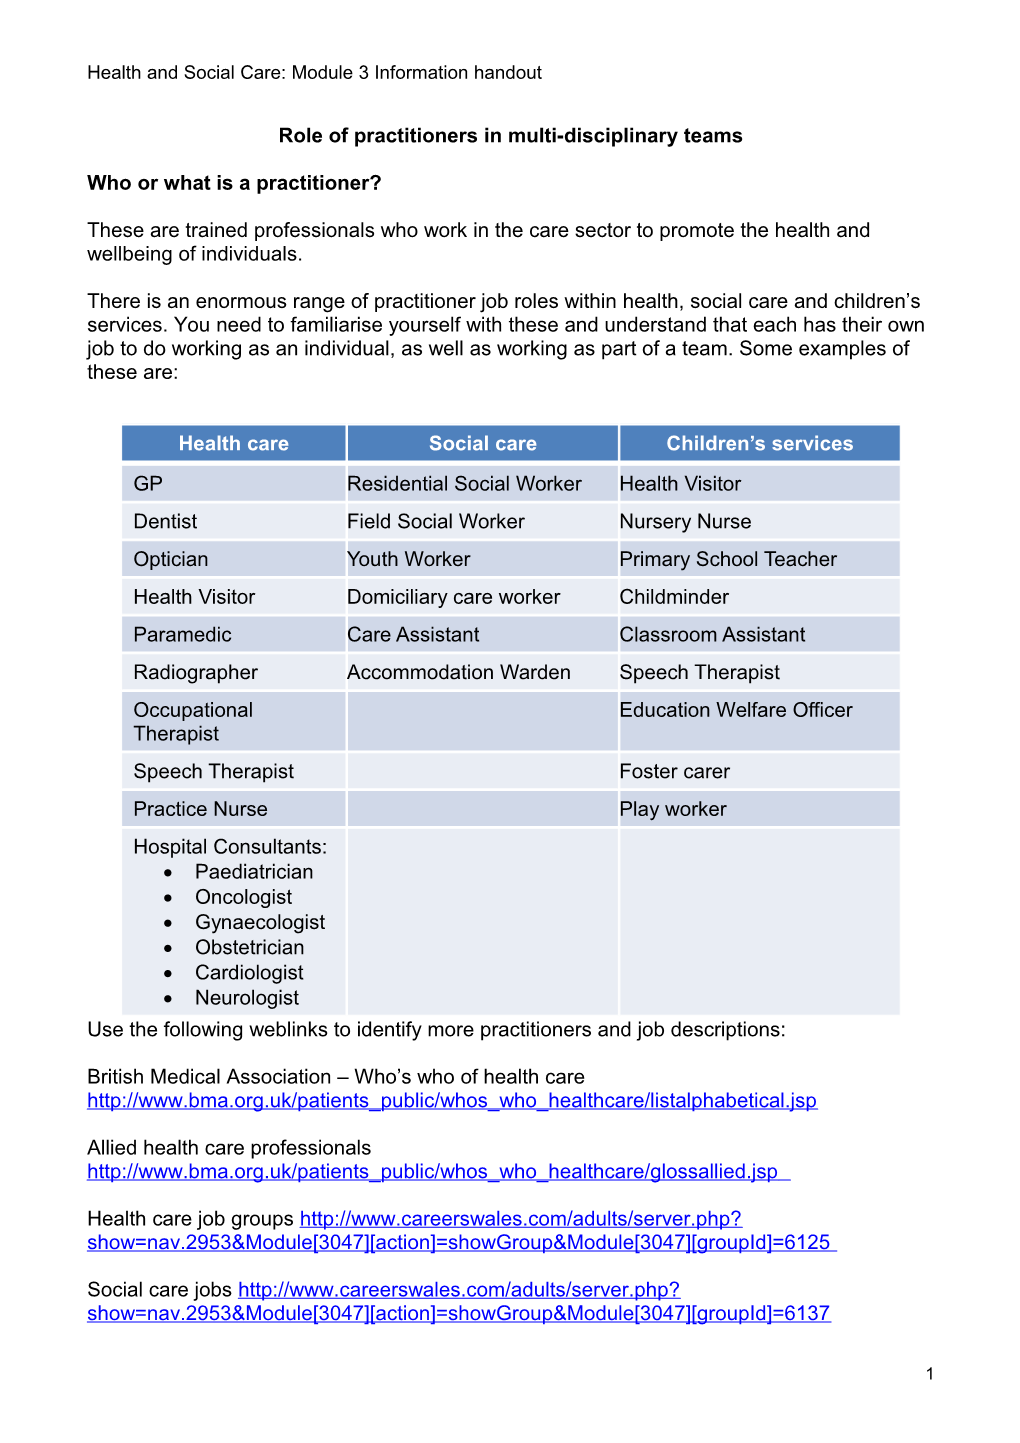 Health and Social Care: Module 3 Information Handout